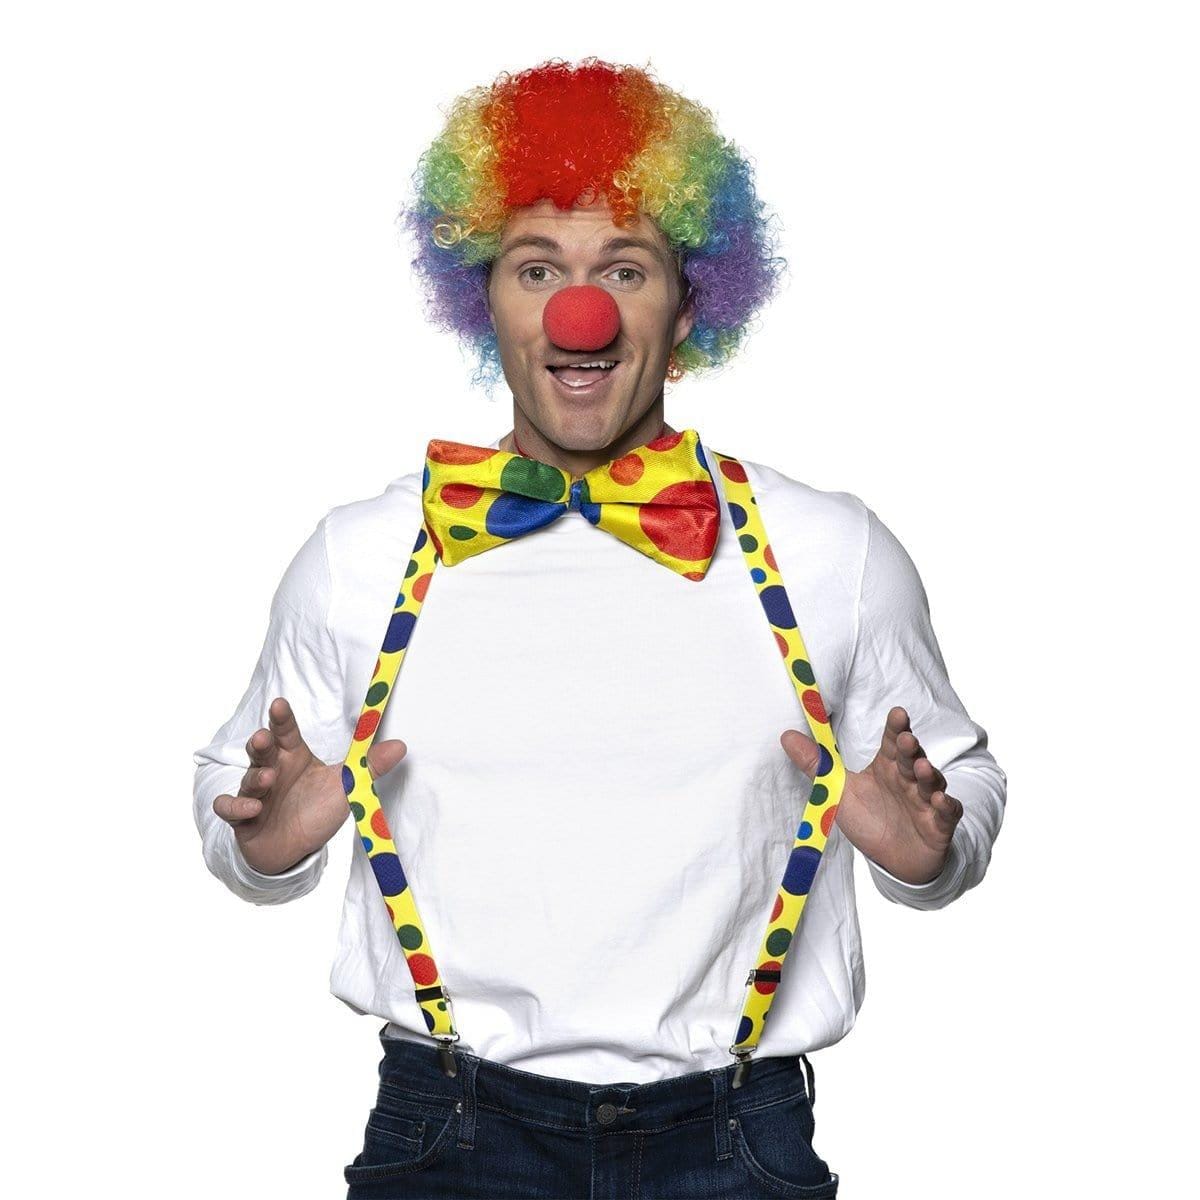 Buy Costume Accessories Clown Accessory Kit for Adults sold at Party Expert